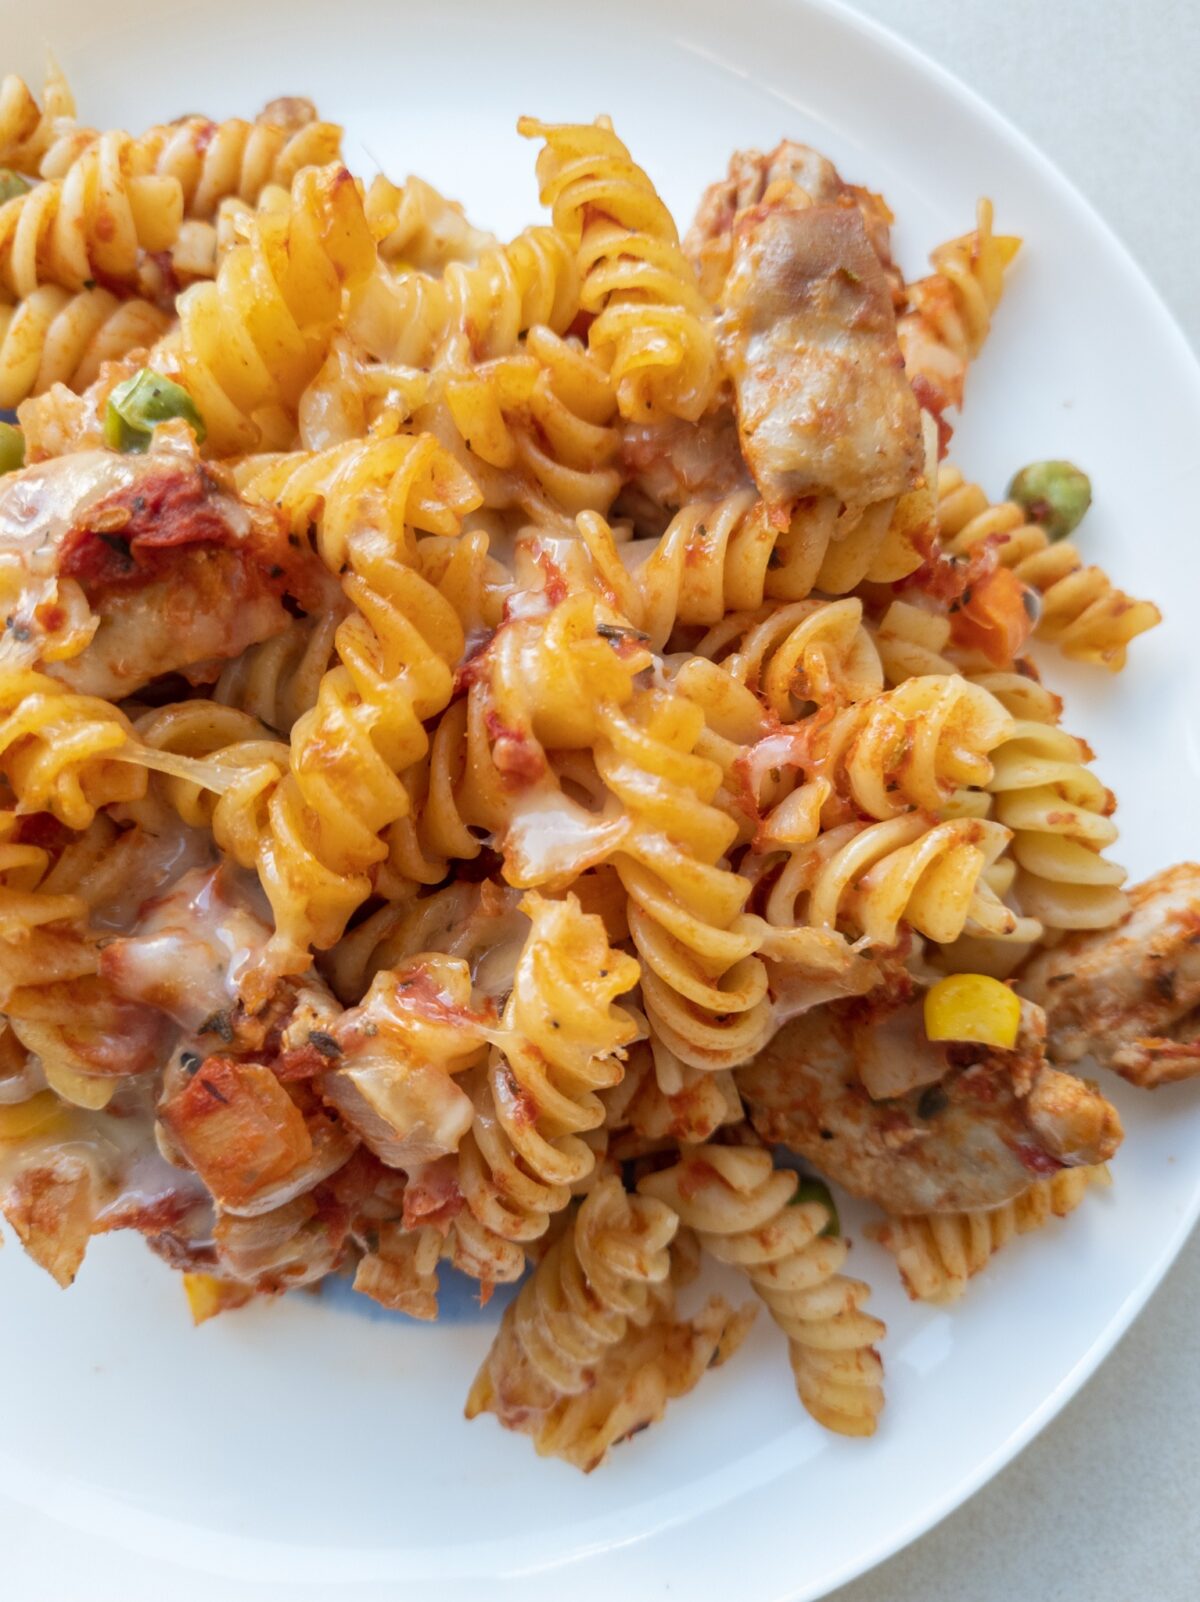 Healthy Tomato Chicken Pasta Bake With Vegetables - Table of Laughter